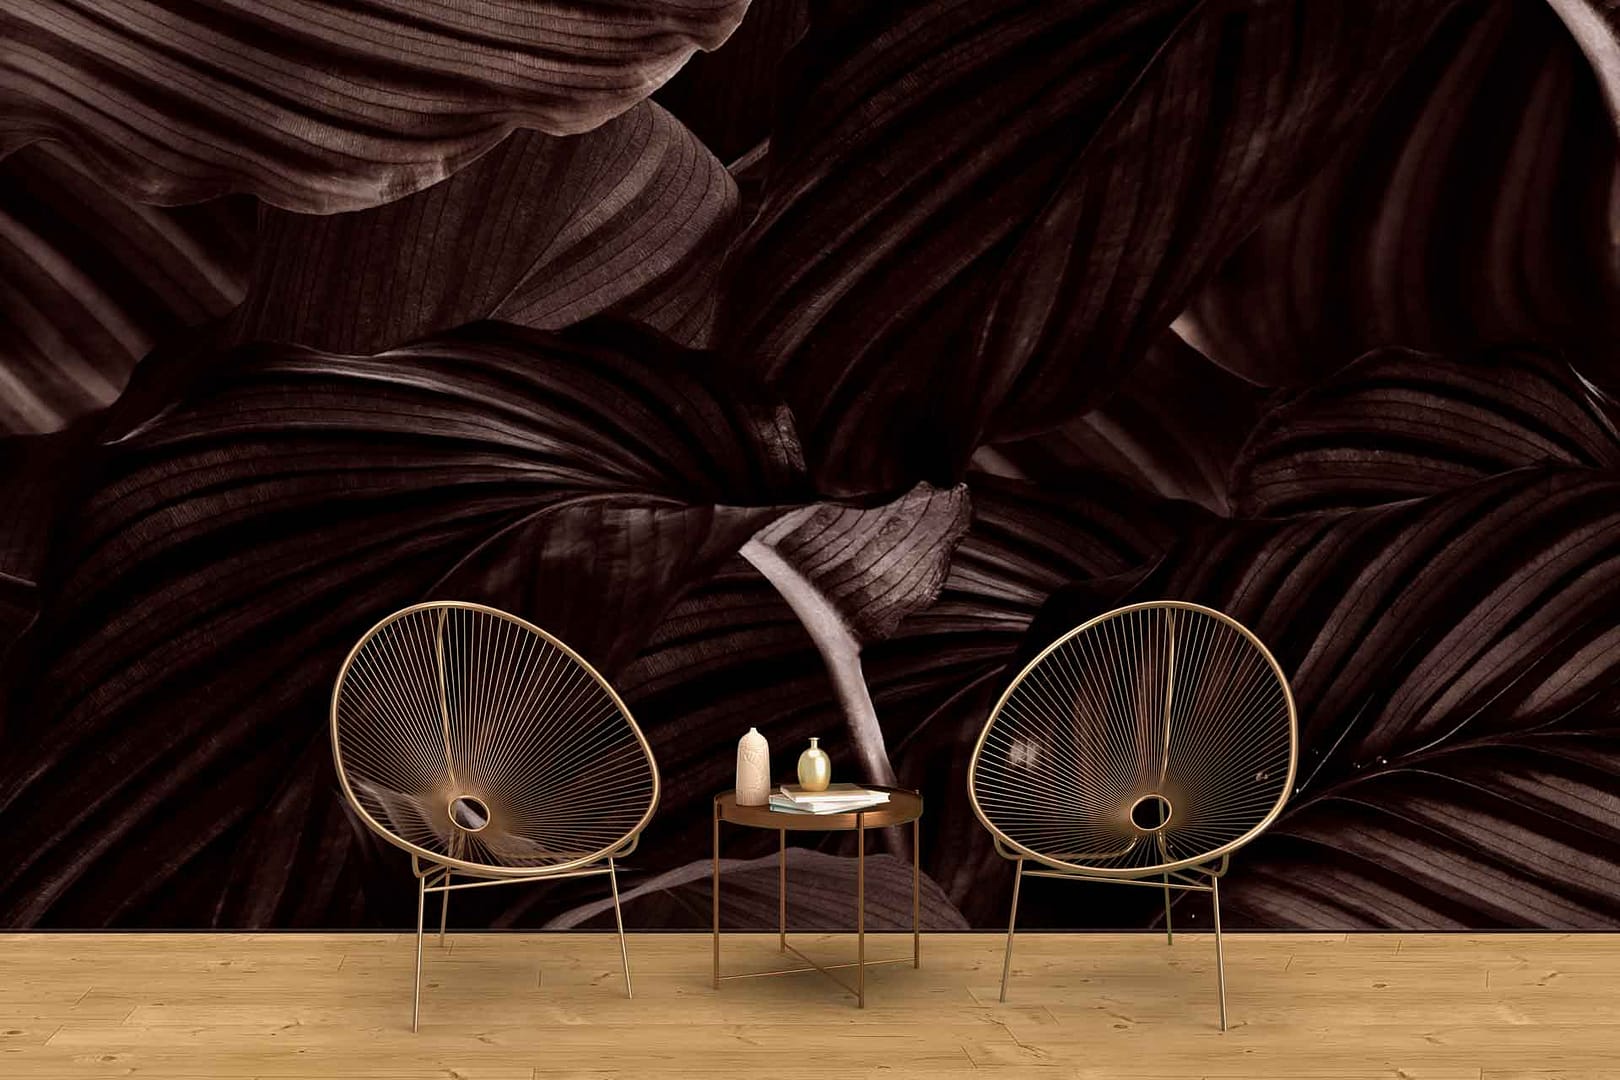 Mocha - a wallpaper made up of dark mocha coloured oversized leaves by Cara Saven Wall Design